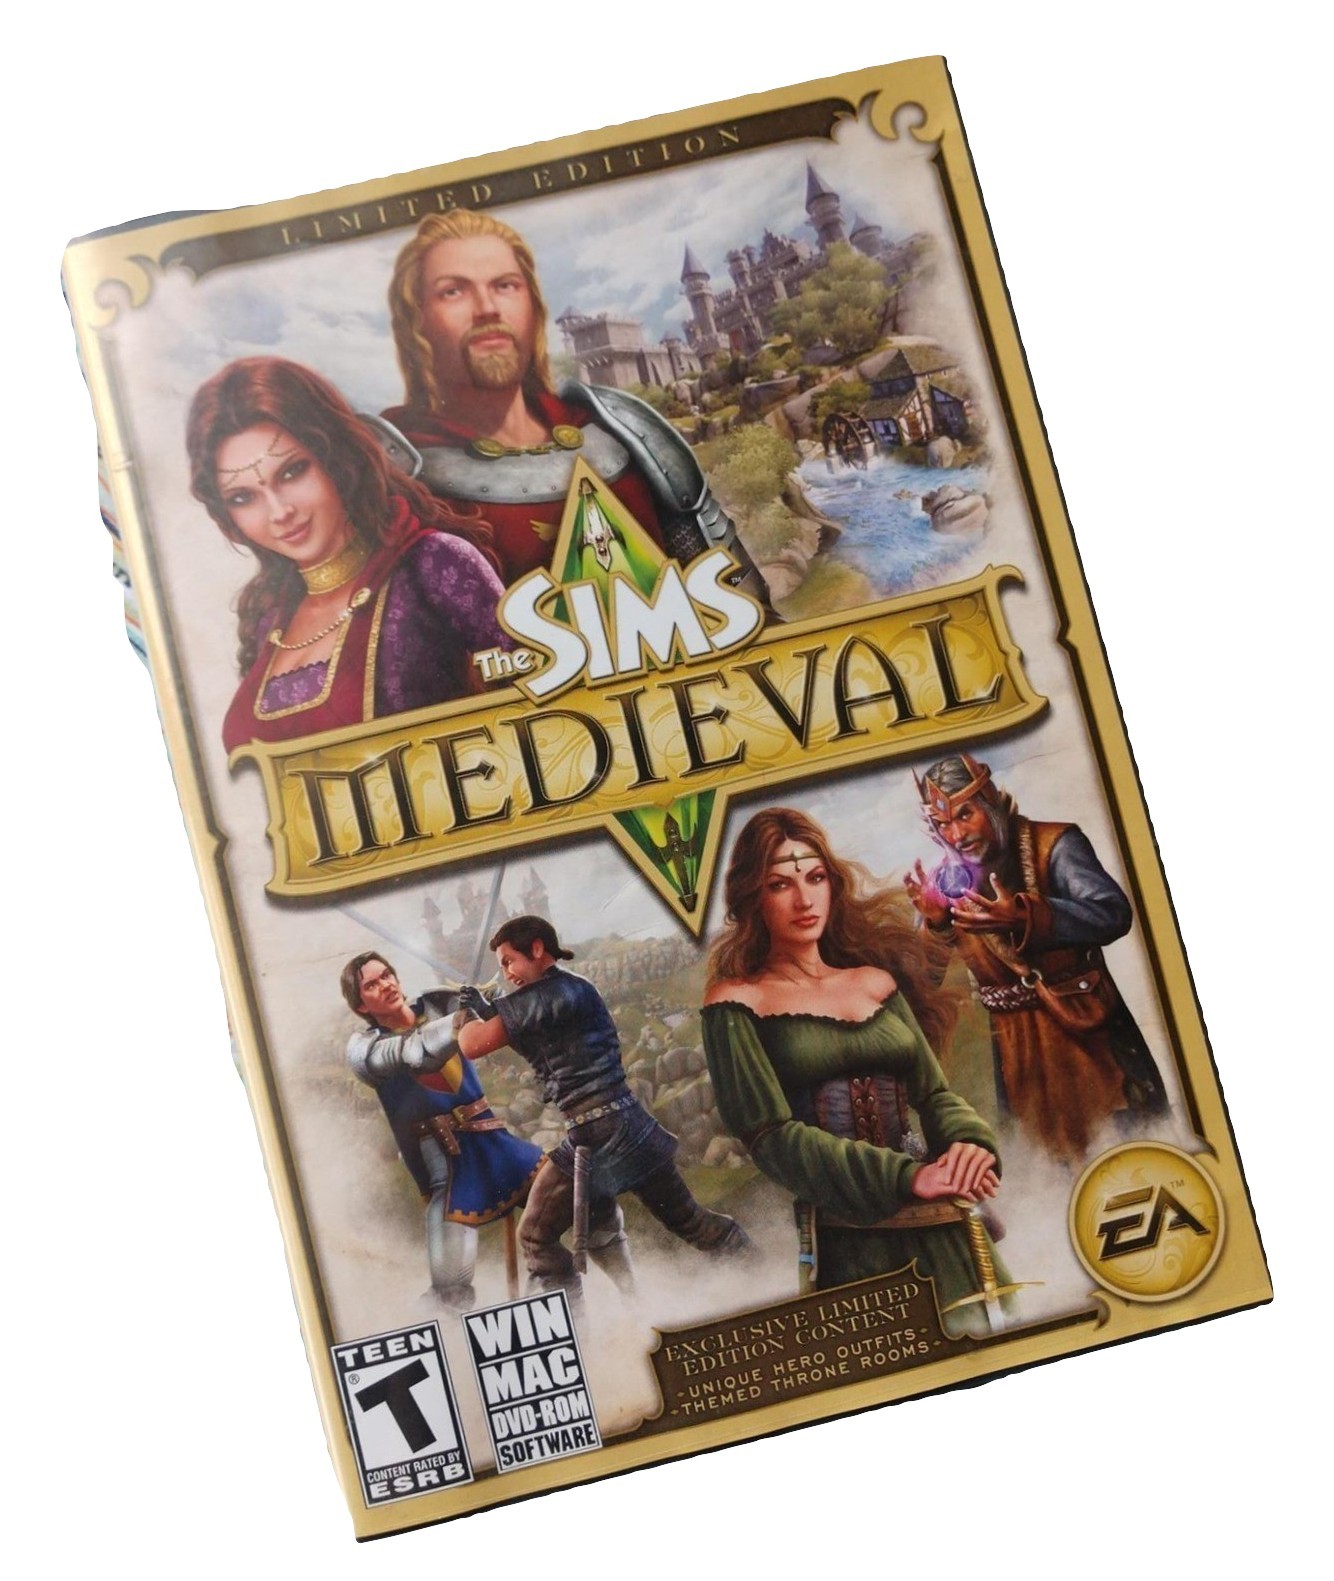 sims medieval deluxe vs special edition